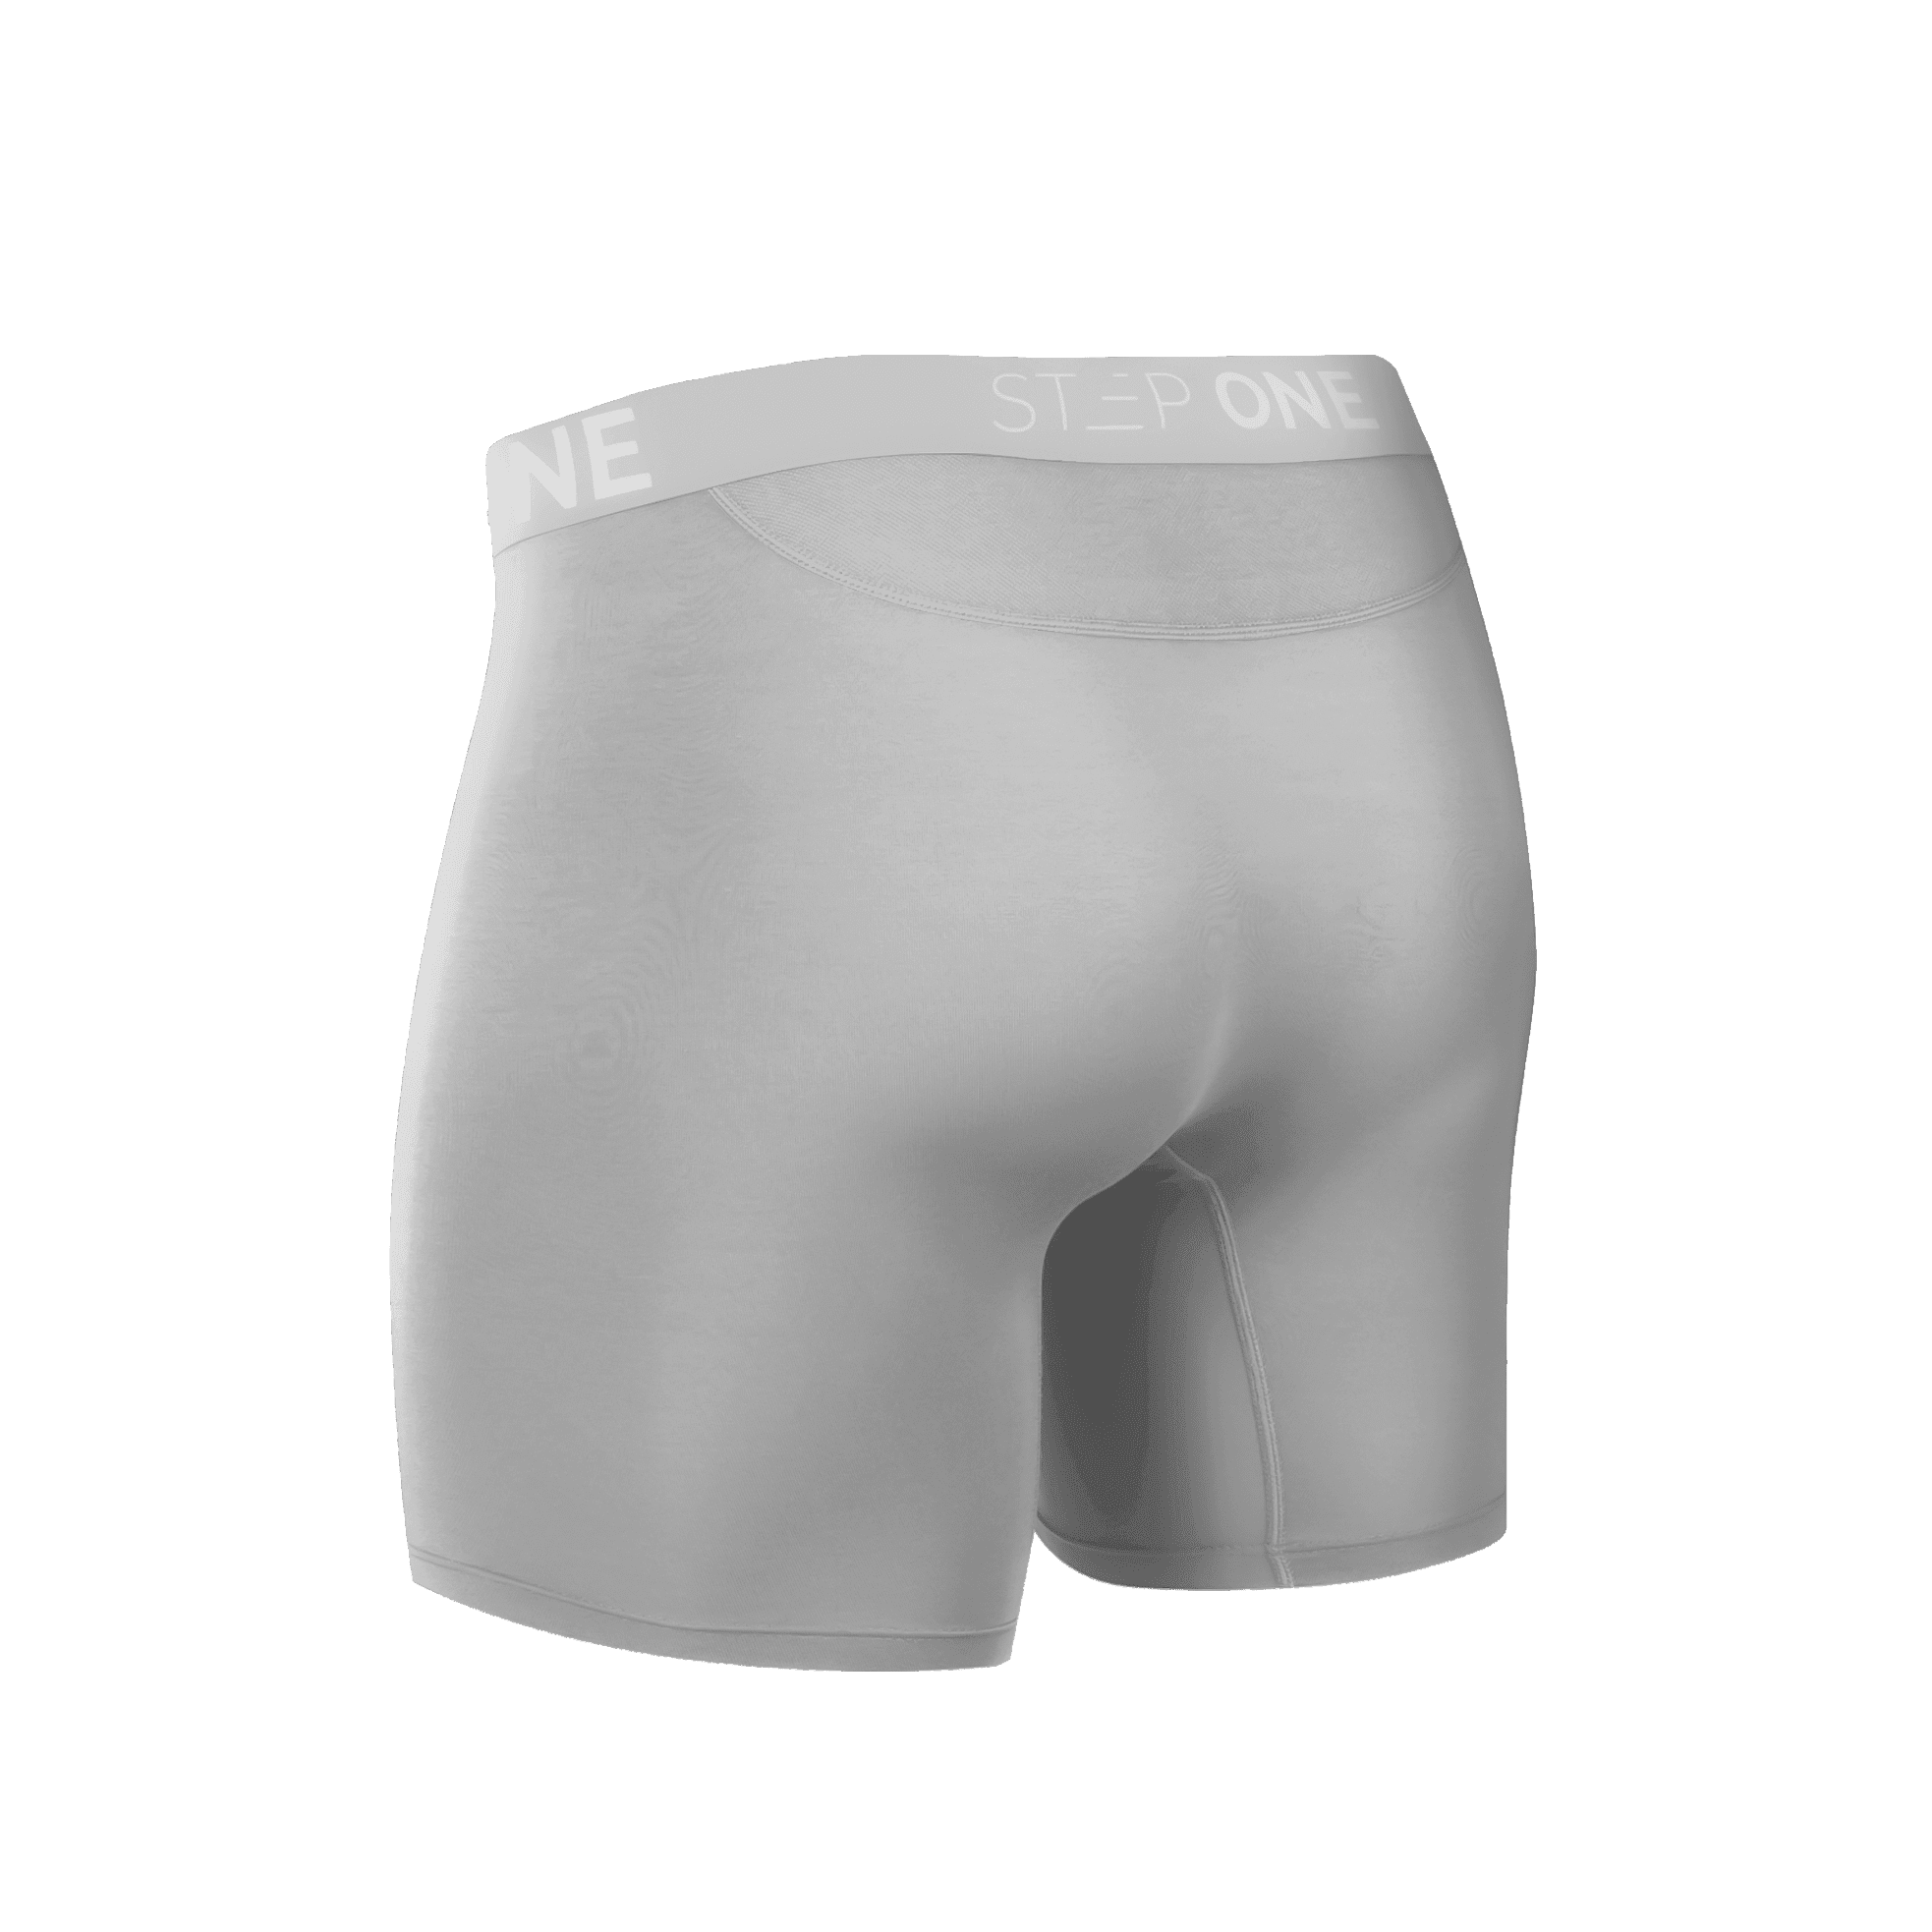 Boxer Brief Fly - Tin Cans | Step One Men's Underwear